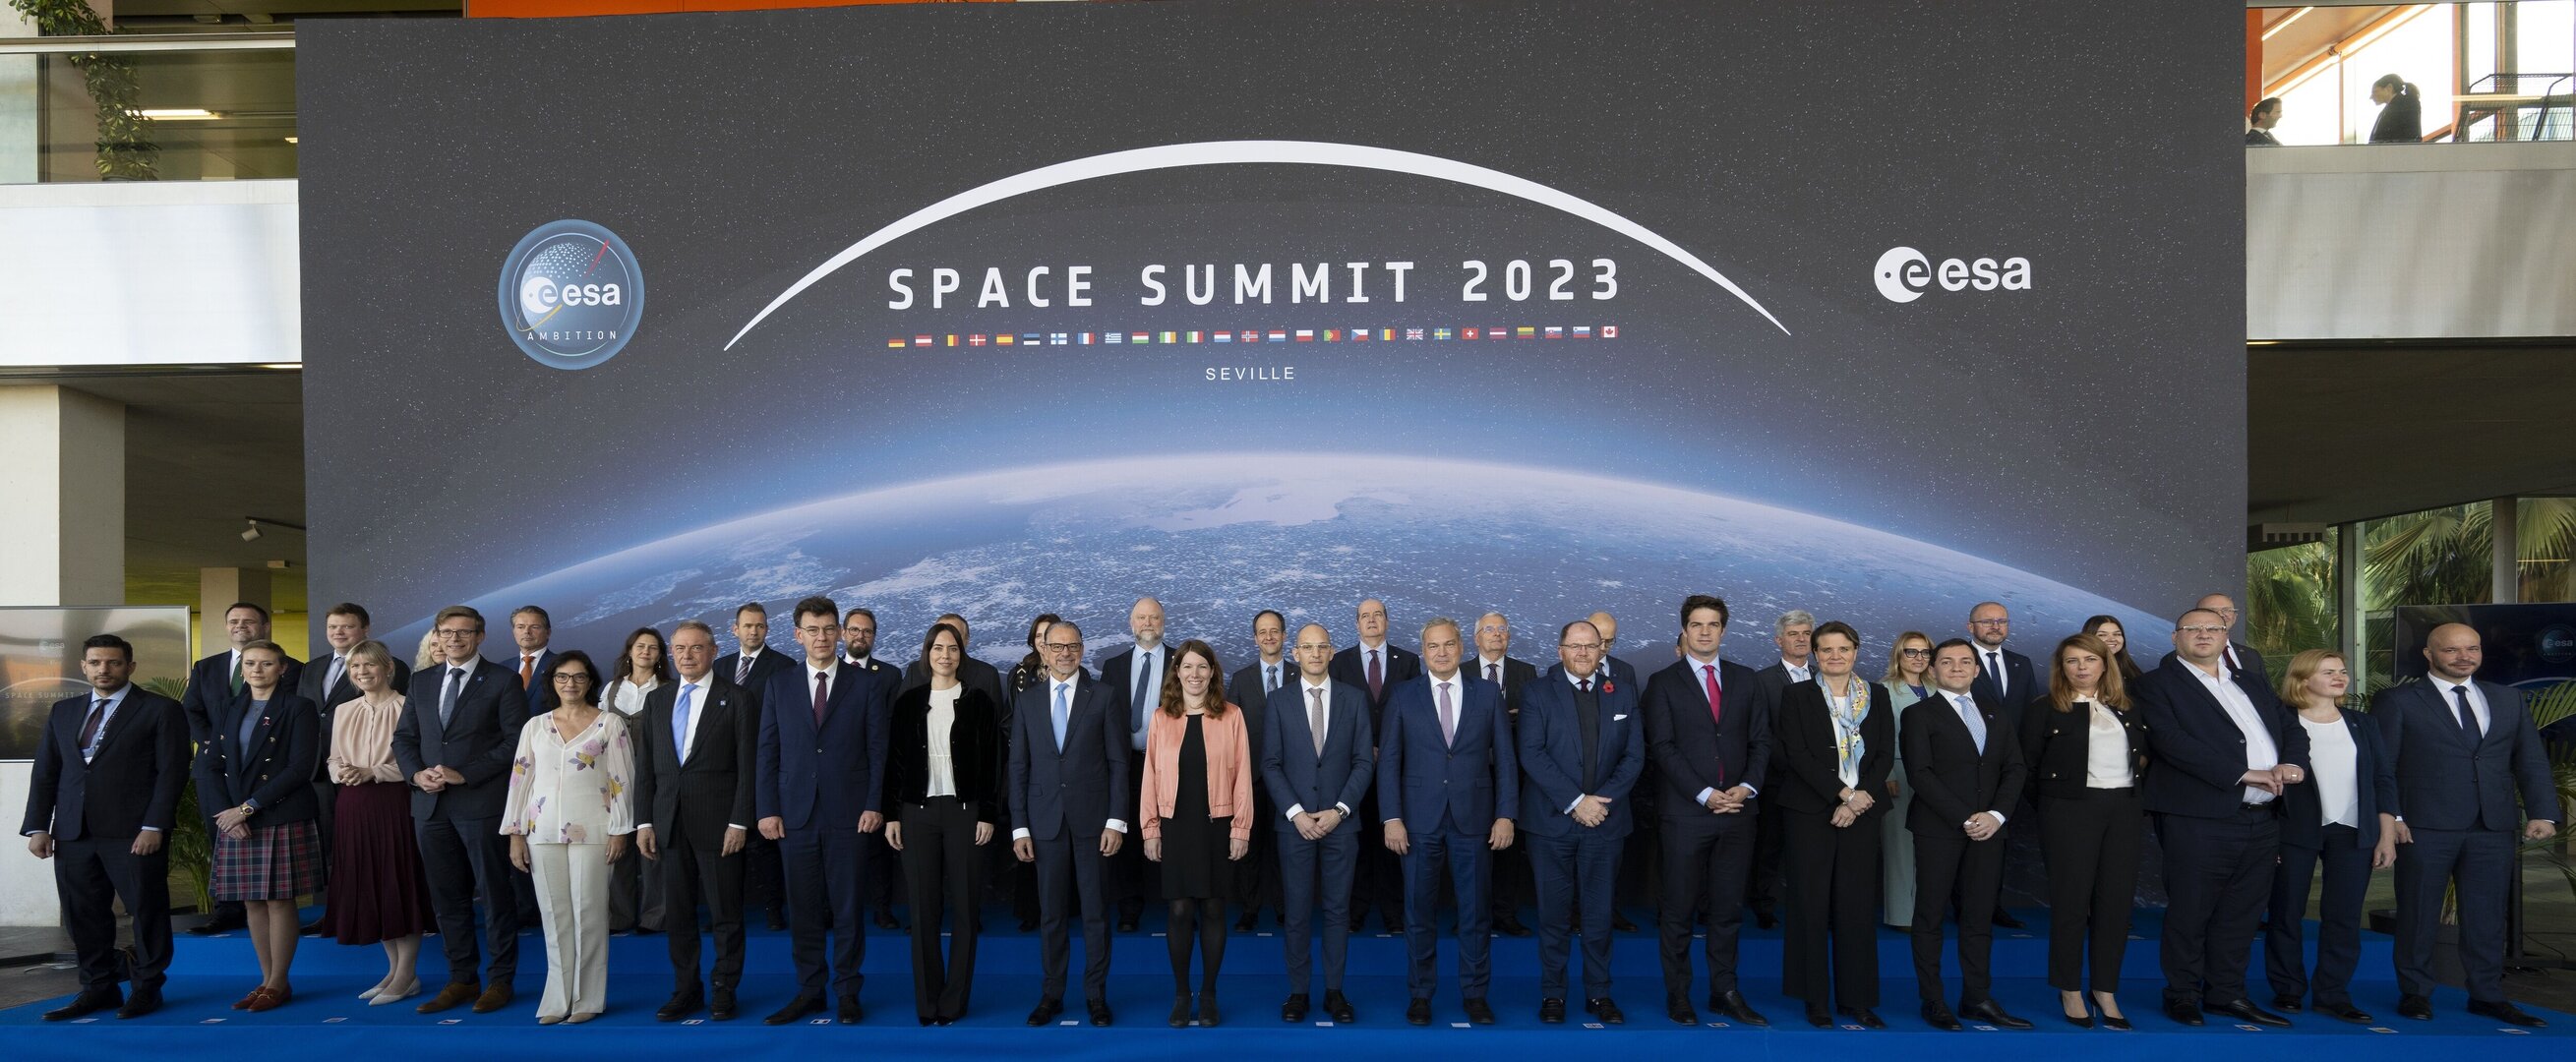 Ministers support Europe’s sustainable and competitive space ambitions